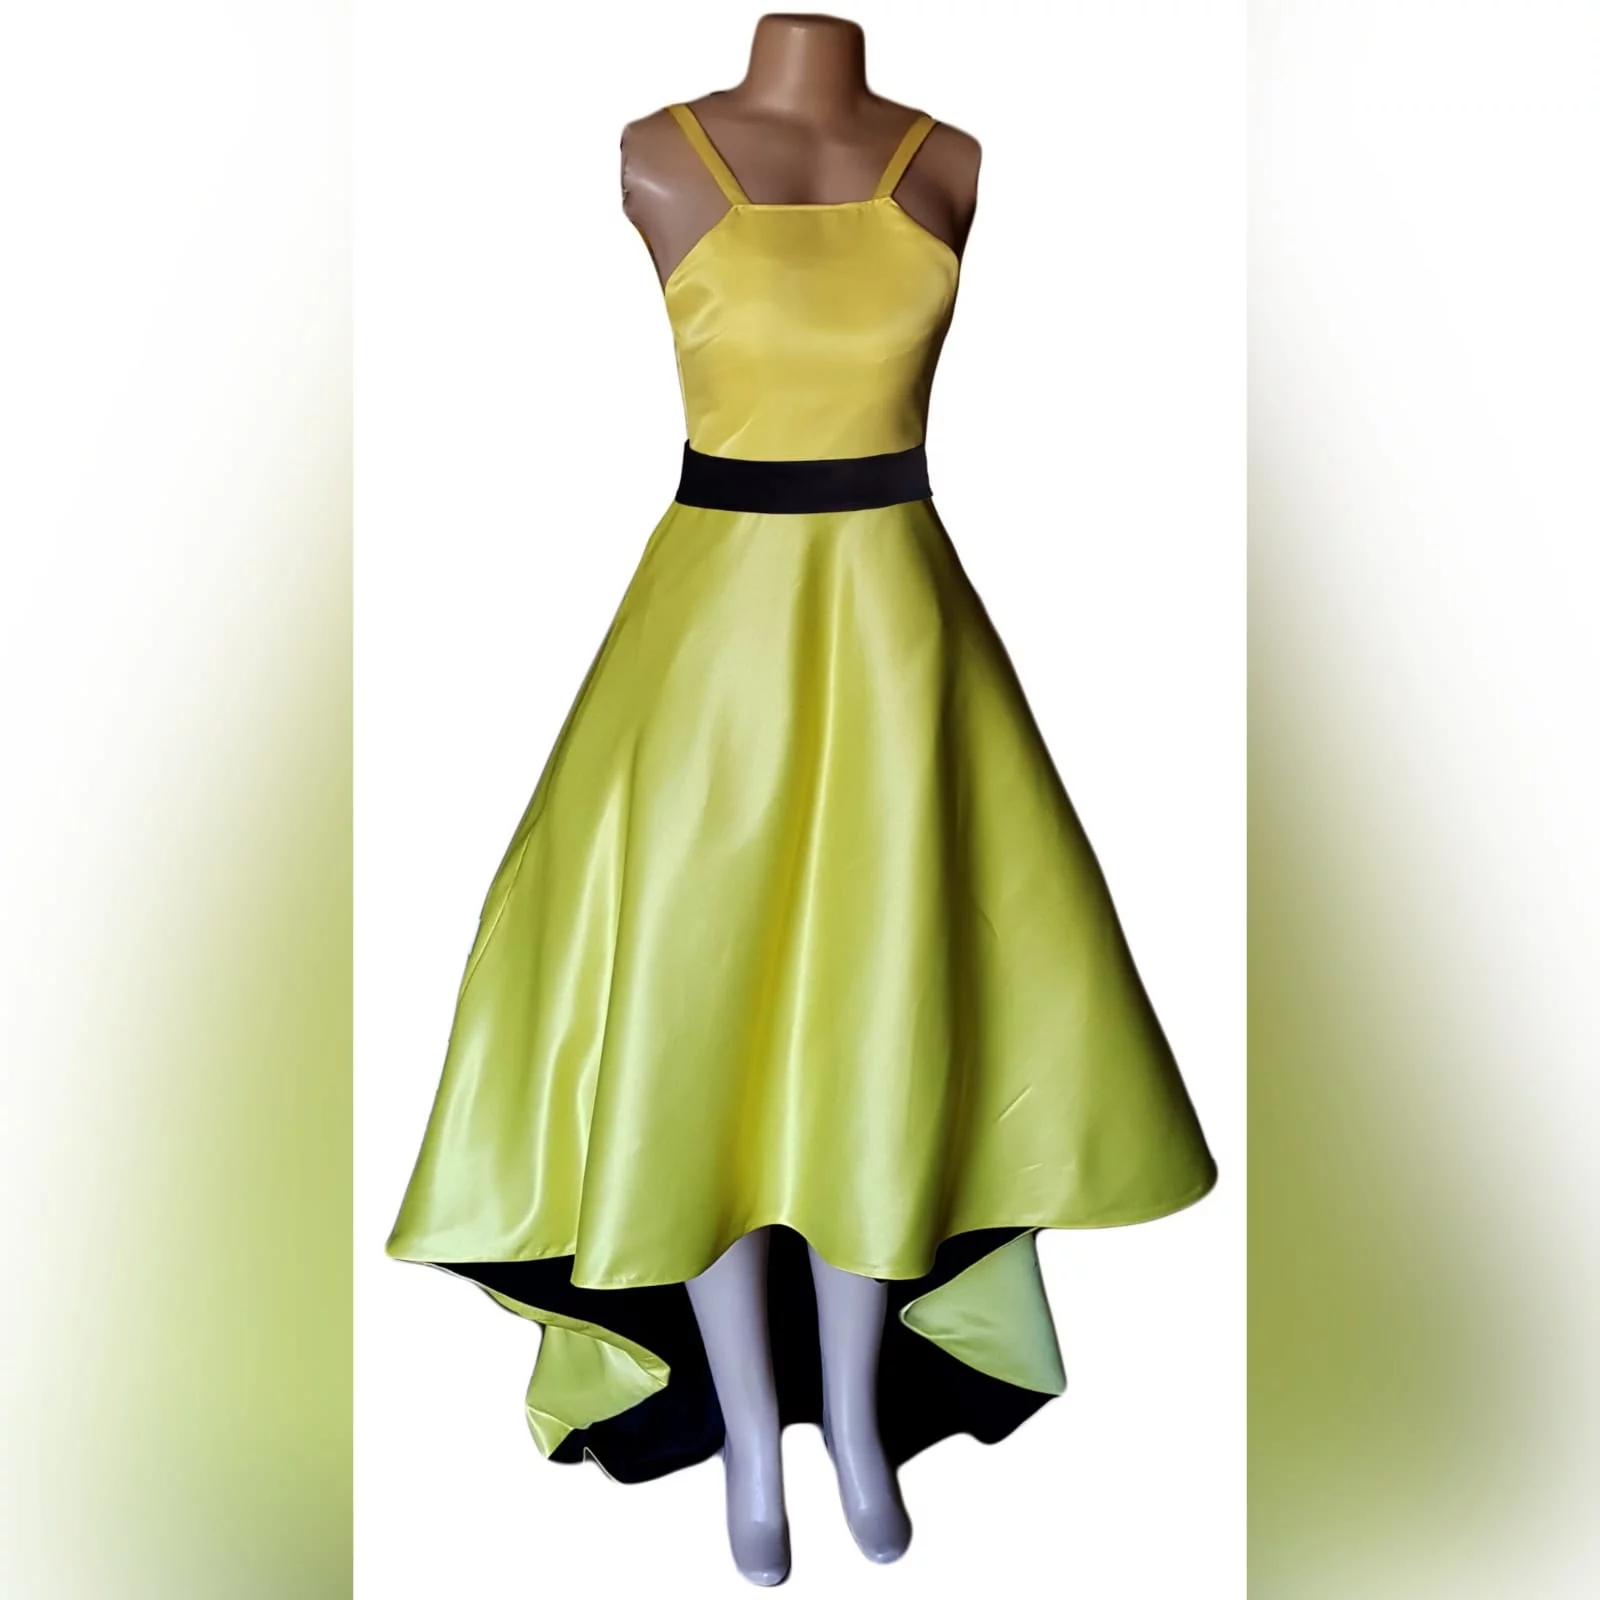 Yellow & black high low matric farewell dress 4 yellow & black high low matric farewell dress with an open back, pockets and a detachable black belt